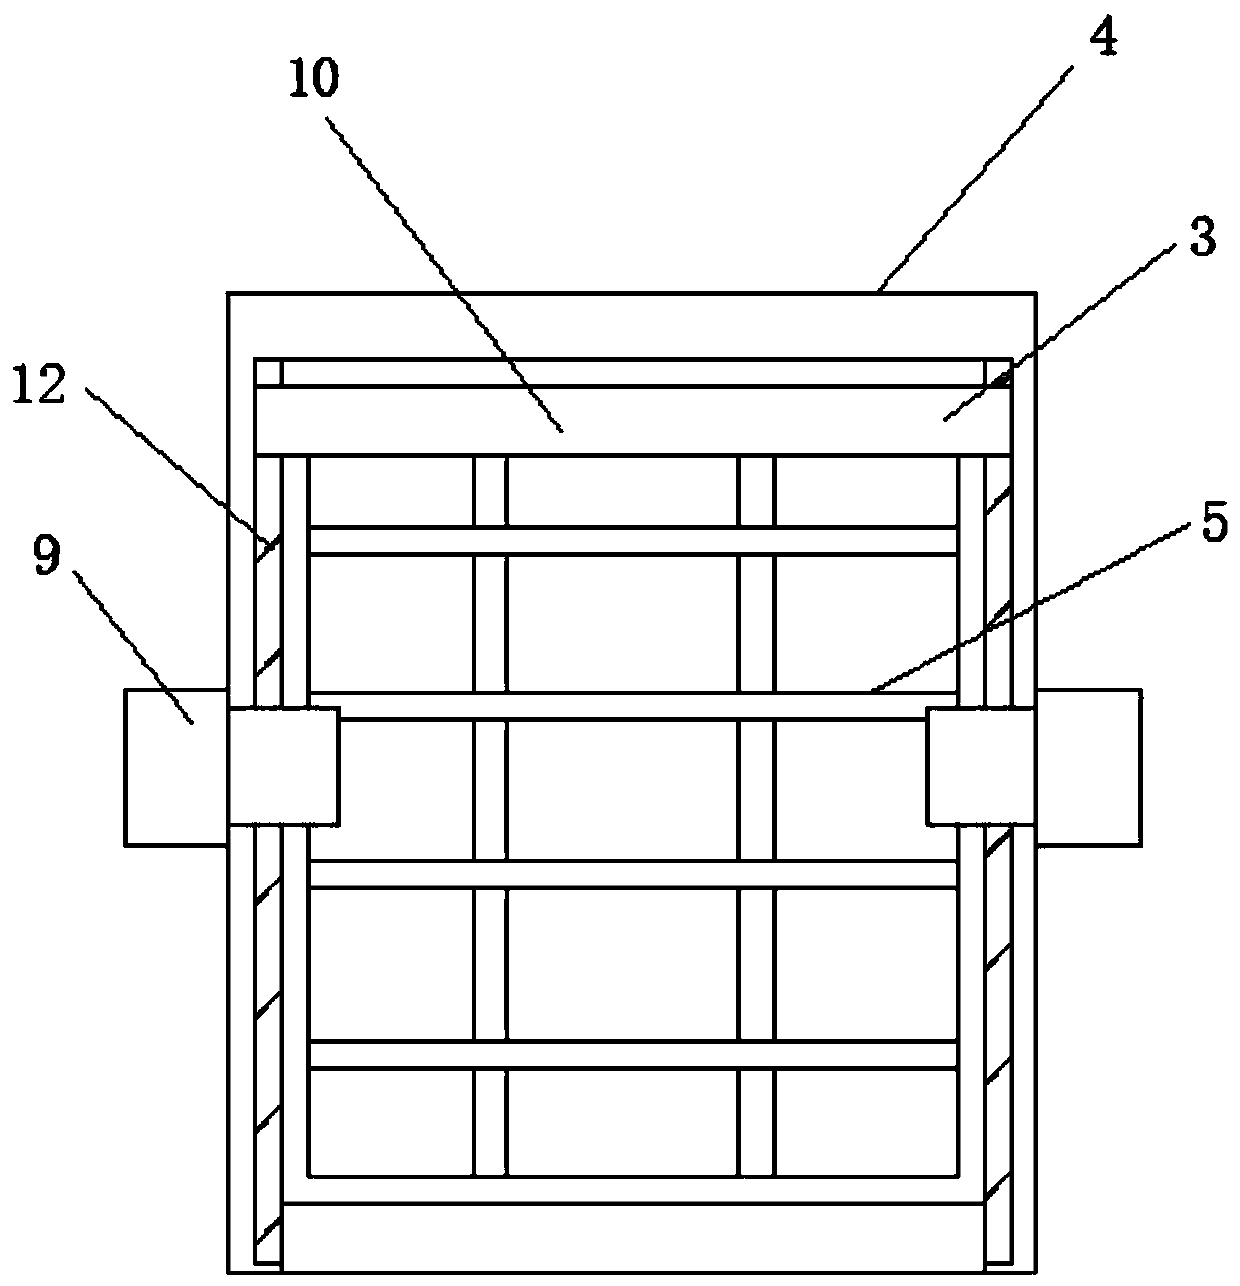 Solar photovoltaic power generation panel assembly support